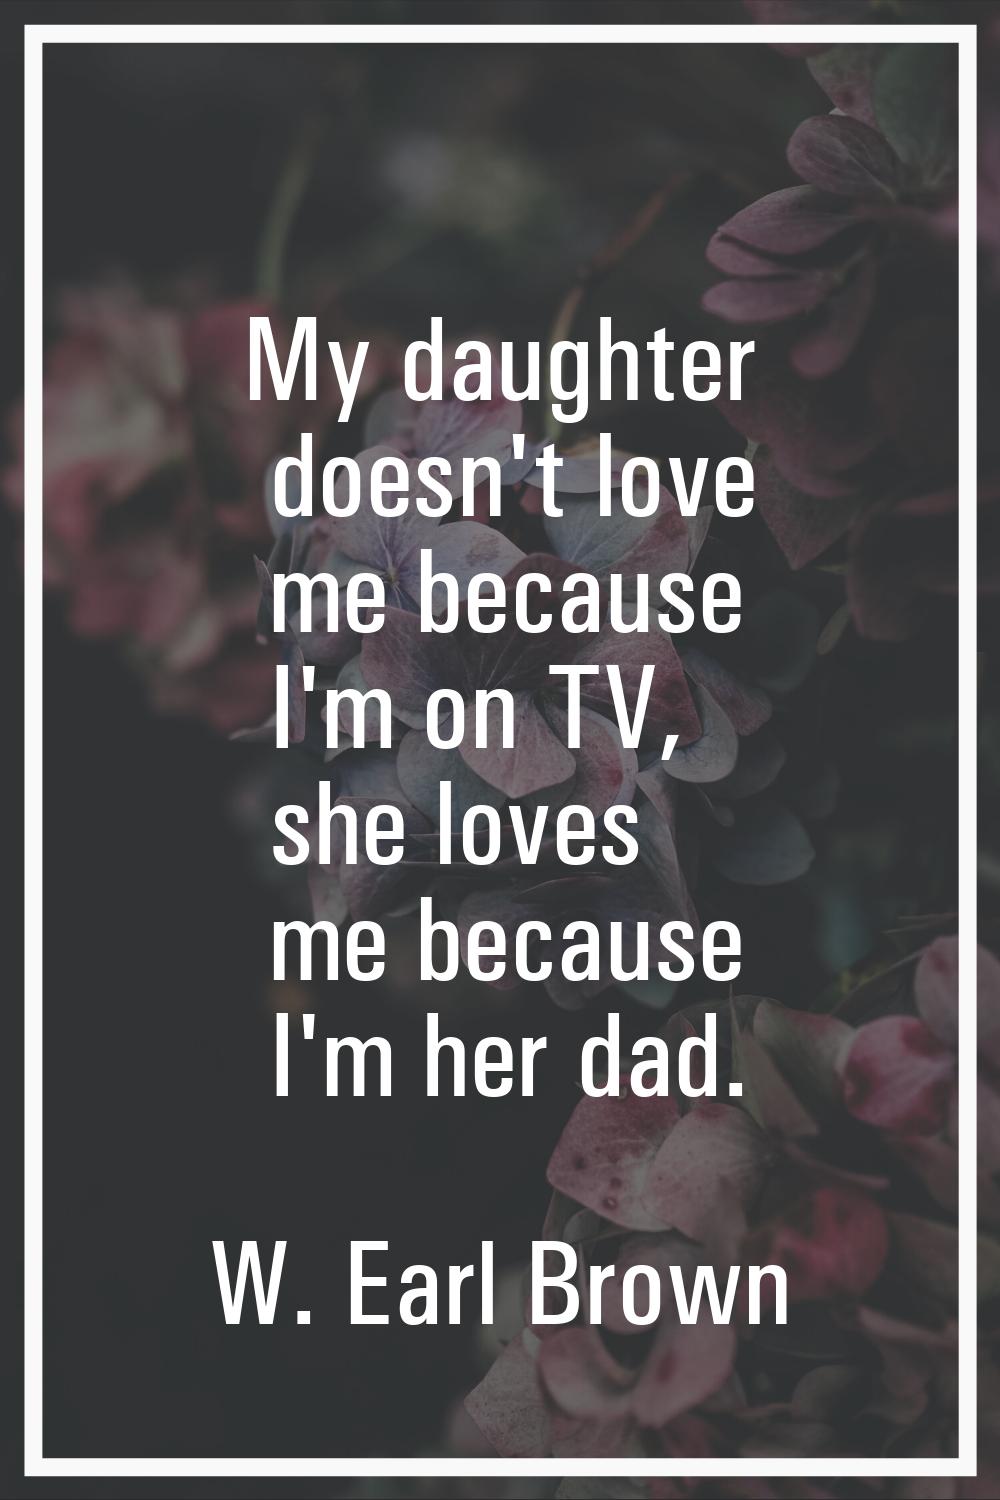 My daughter doesn't love me because I'm on TV, she loves me because I'm her dad.